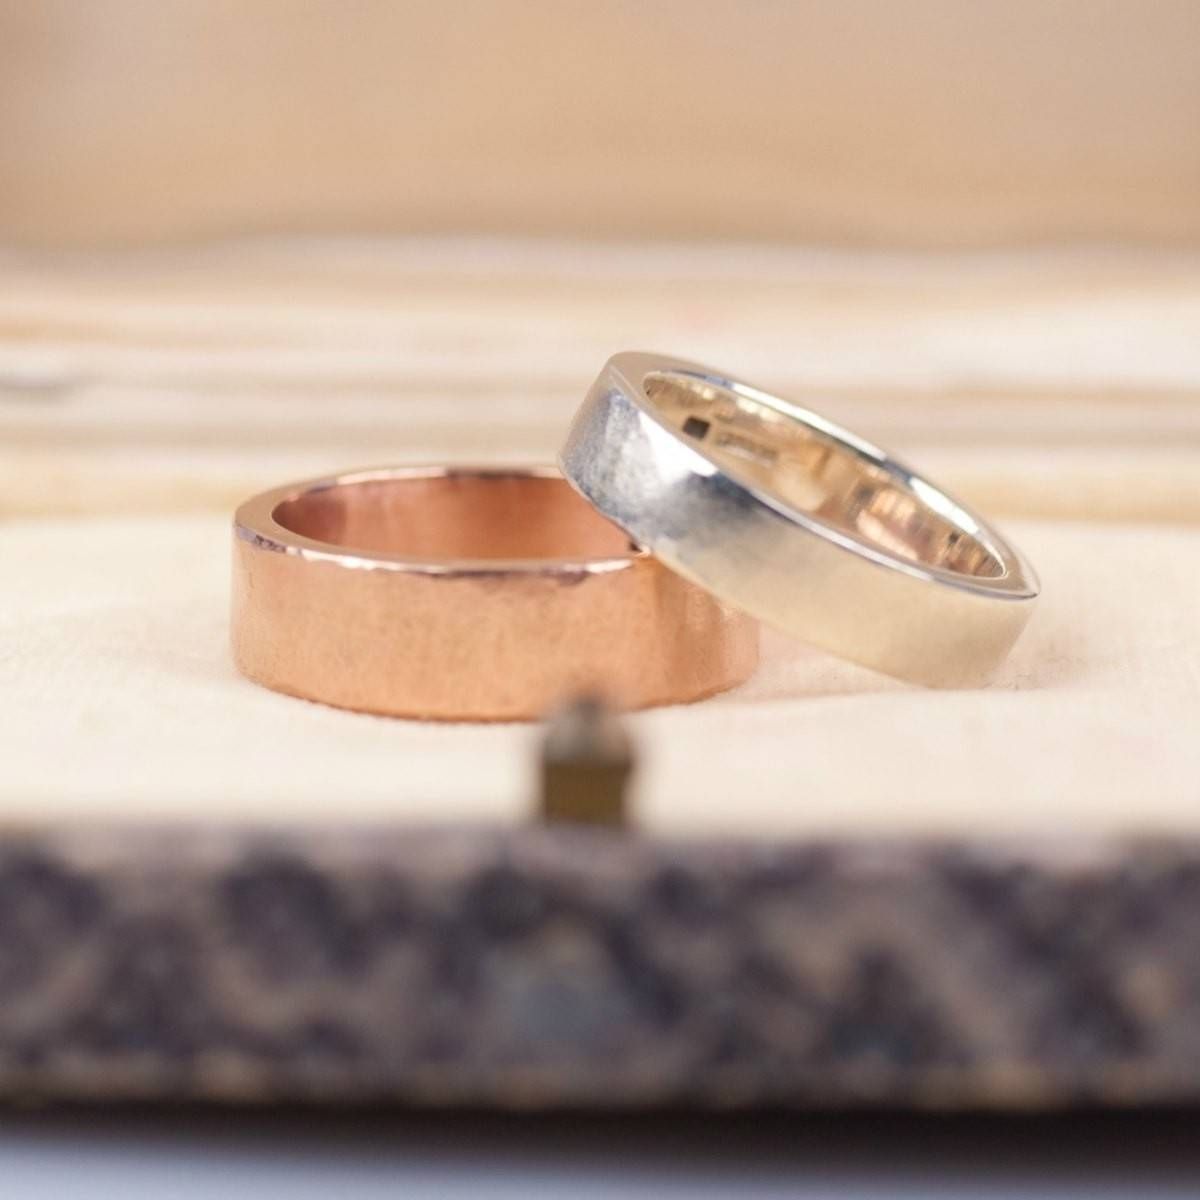 6mm Organic Gold Band | Handmade Gold, Silver And Gemstone Inside Scottish Wedding Bands (View 15 of 15)